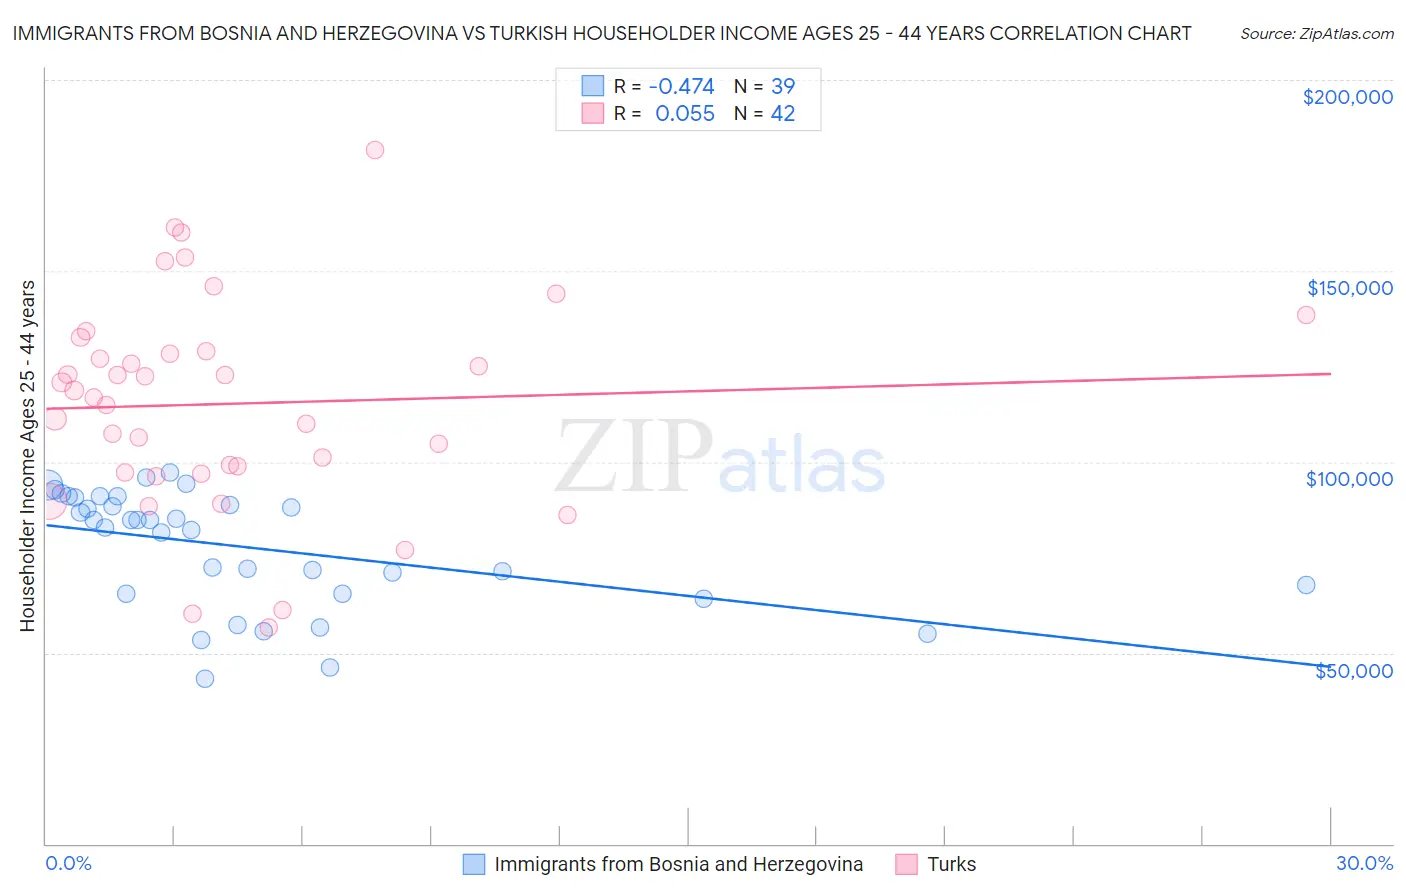 Immigrants from Bosnia and Herzegovina vs Turkish Householder Income Ages 25 - 44 years